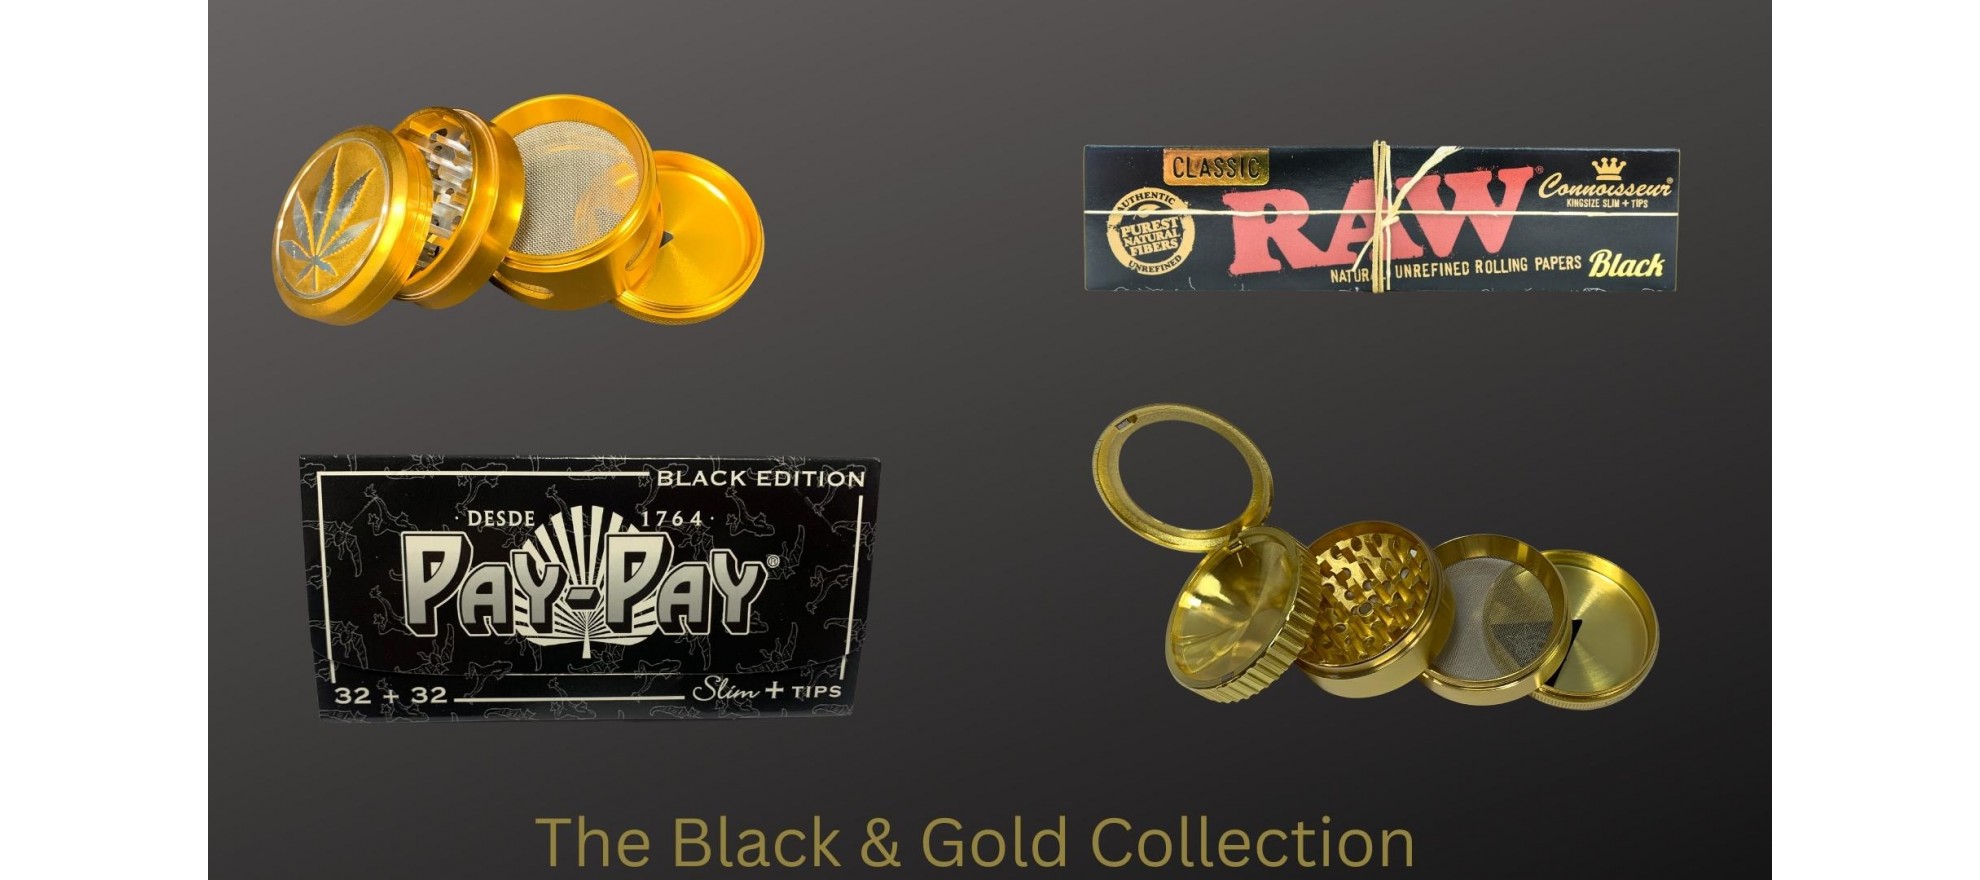 The Black & Gold Collection